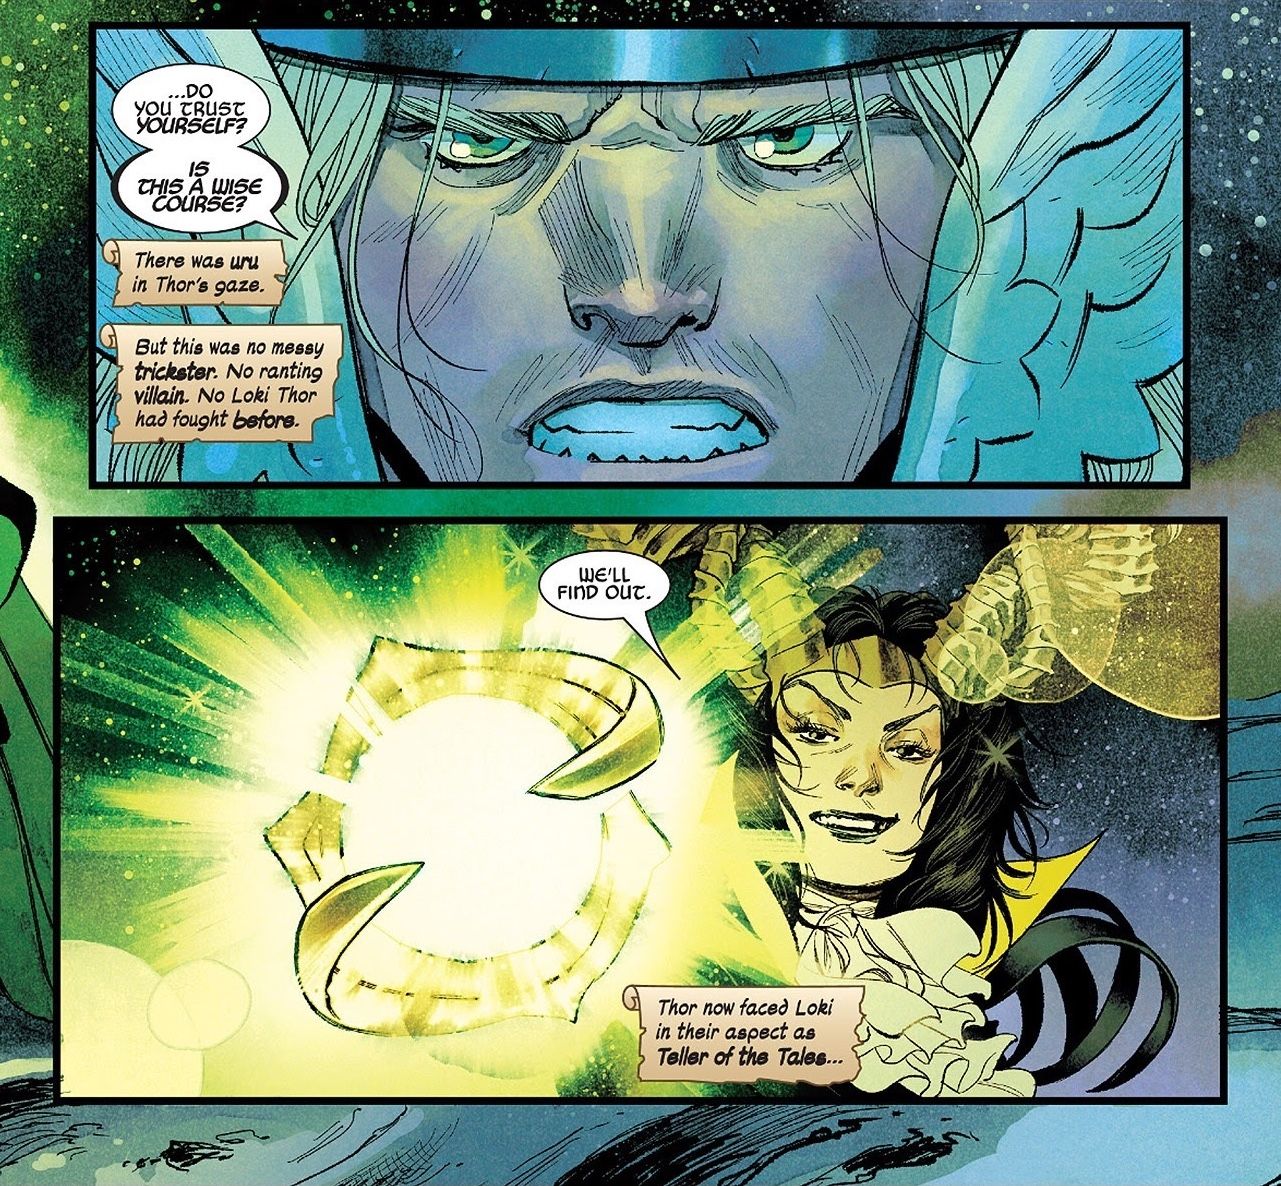 Immortal Thor Officially Debuts Loki’s Ultimate Form – The Teller of the Tales